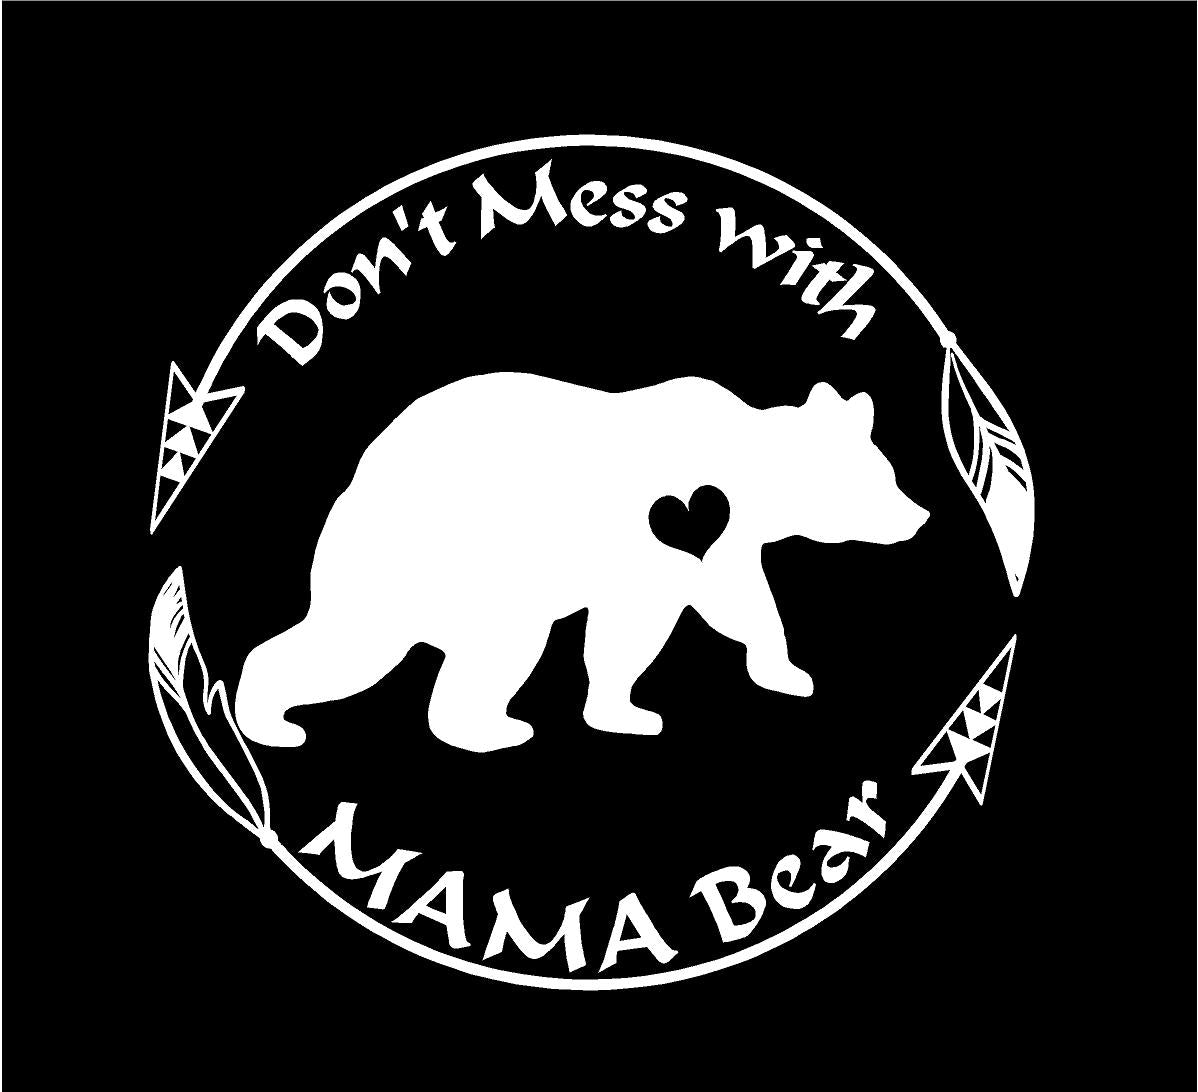 Baby Bear Hide and Seek Champion Baby Bear Decal Car Decals Viny Decals Mama Bear Decal Hit Me Decal Car Decals Mama Bear